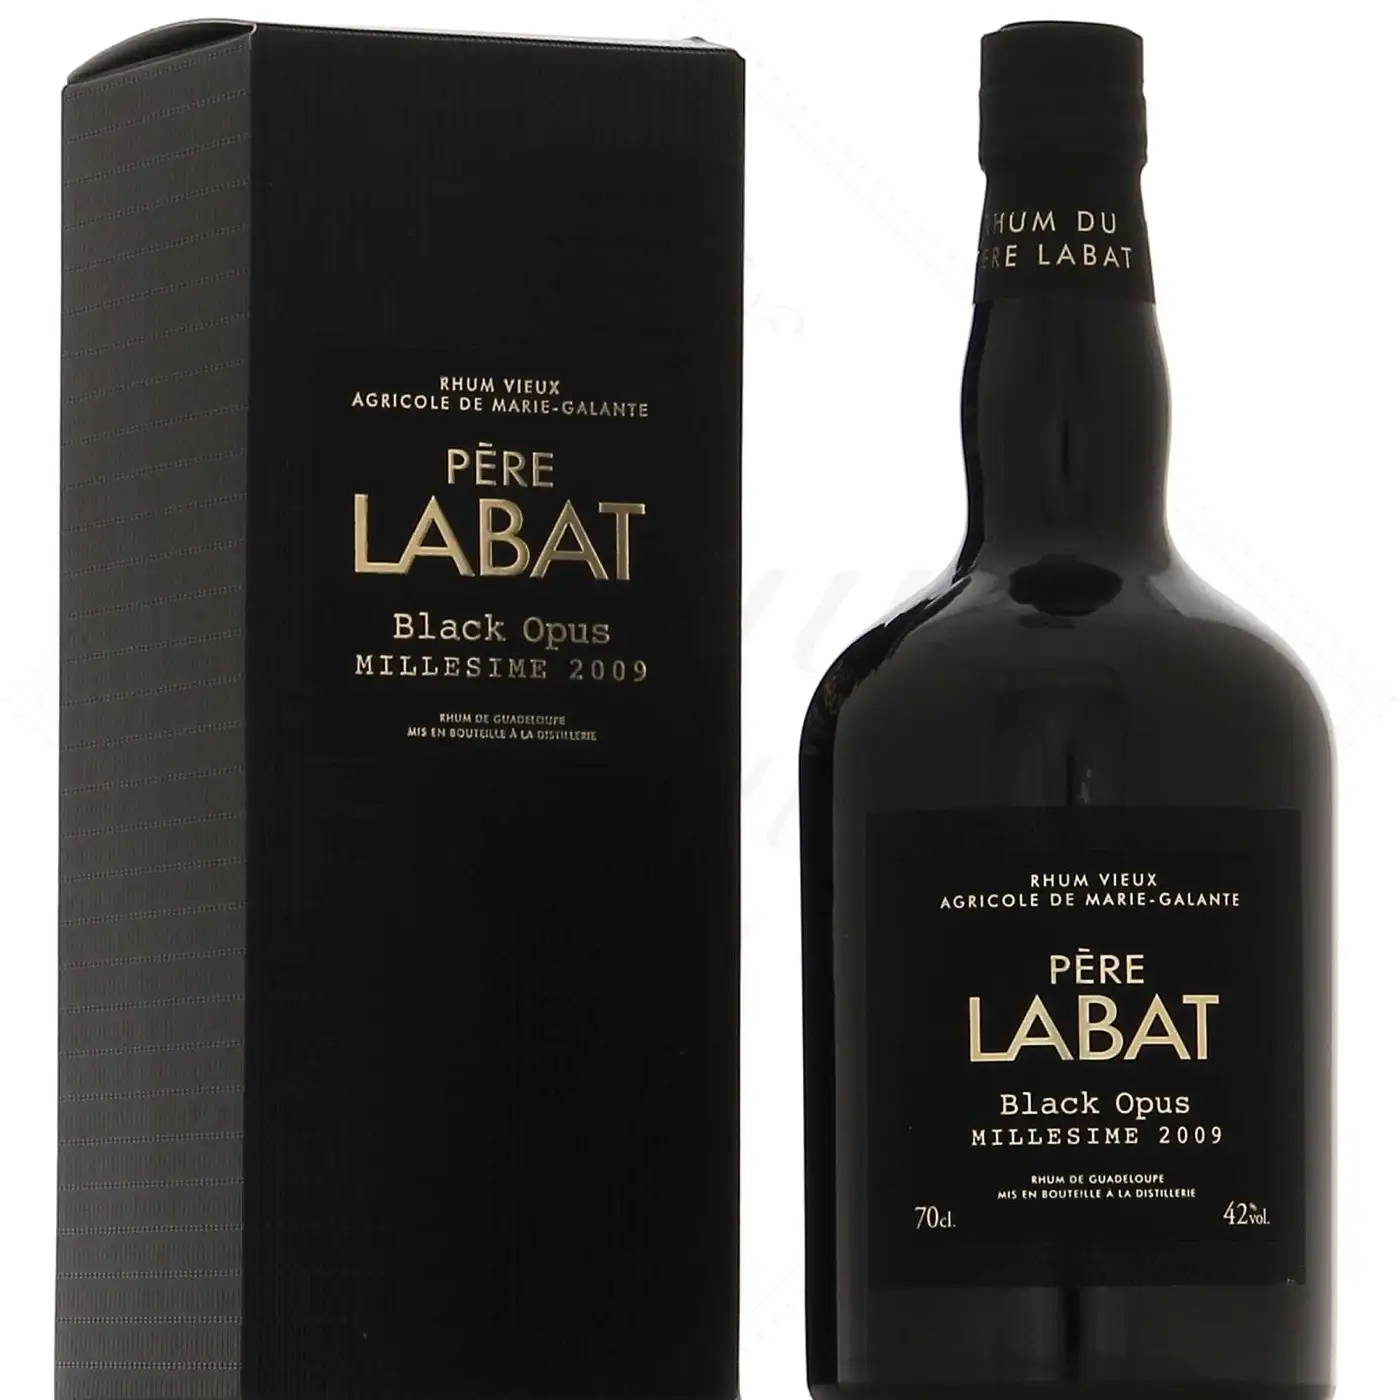 Image of the front of the bottle of the rum Père Labat Black Opus